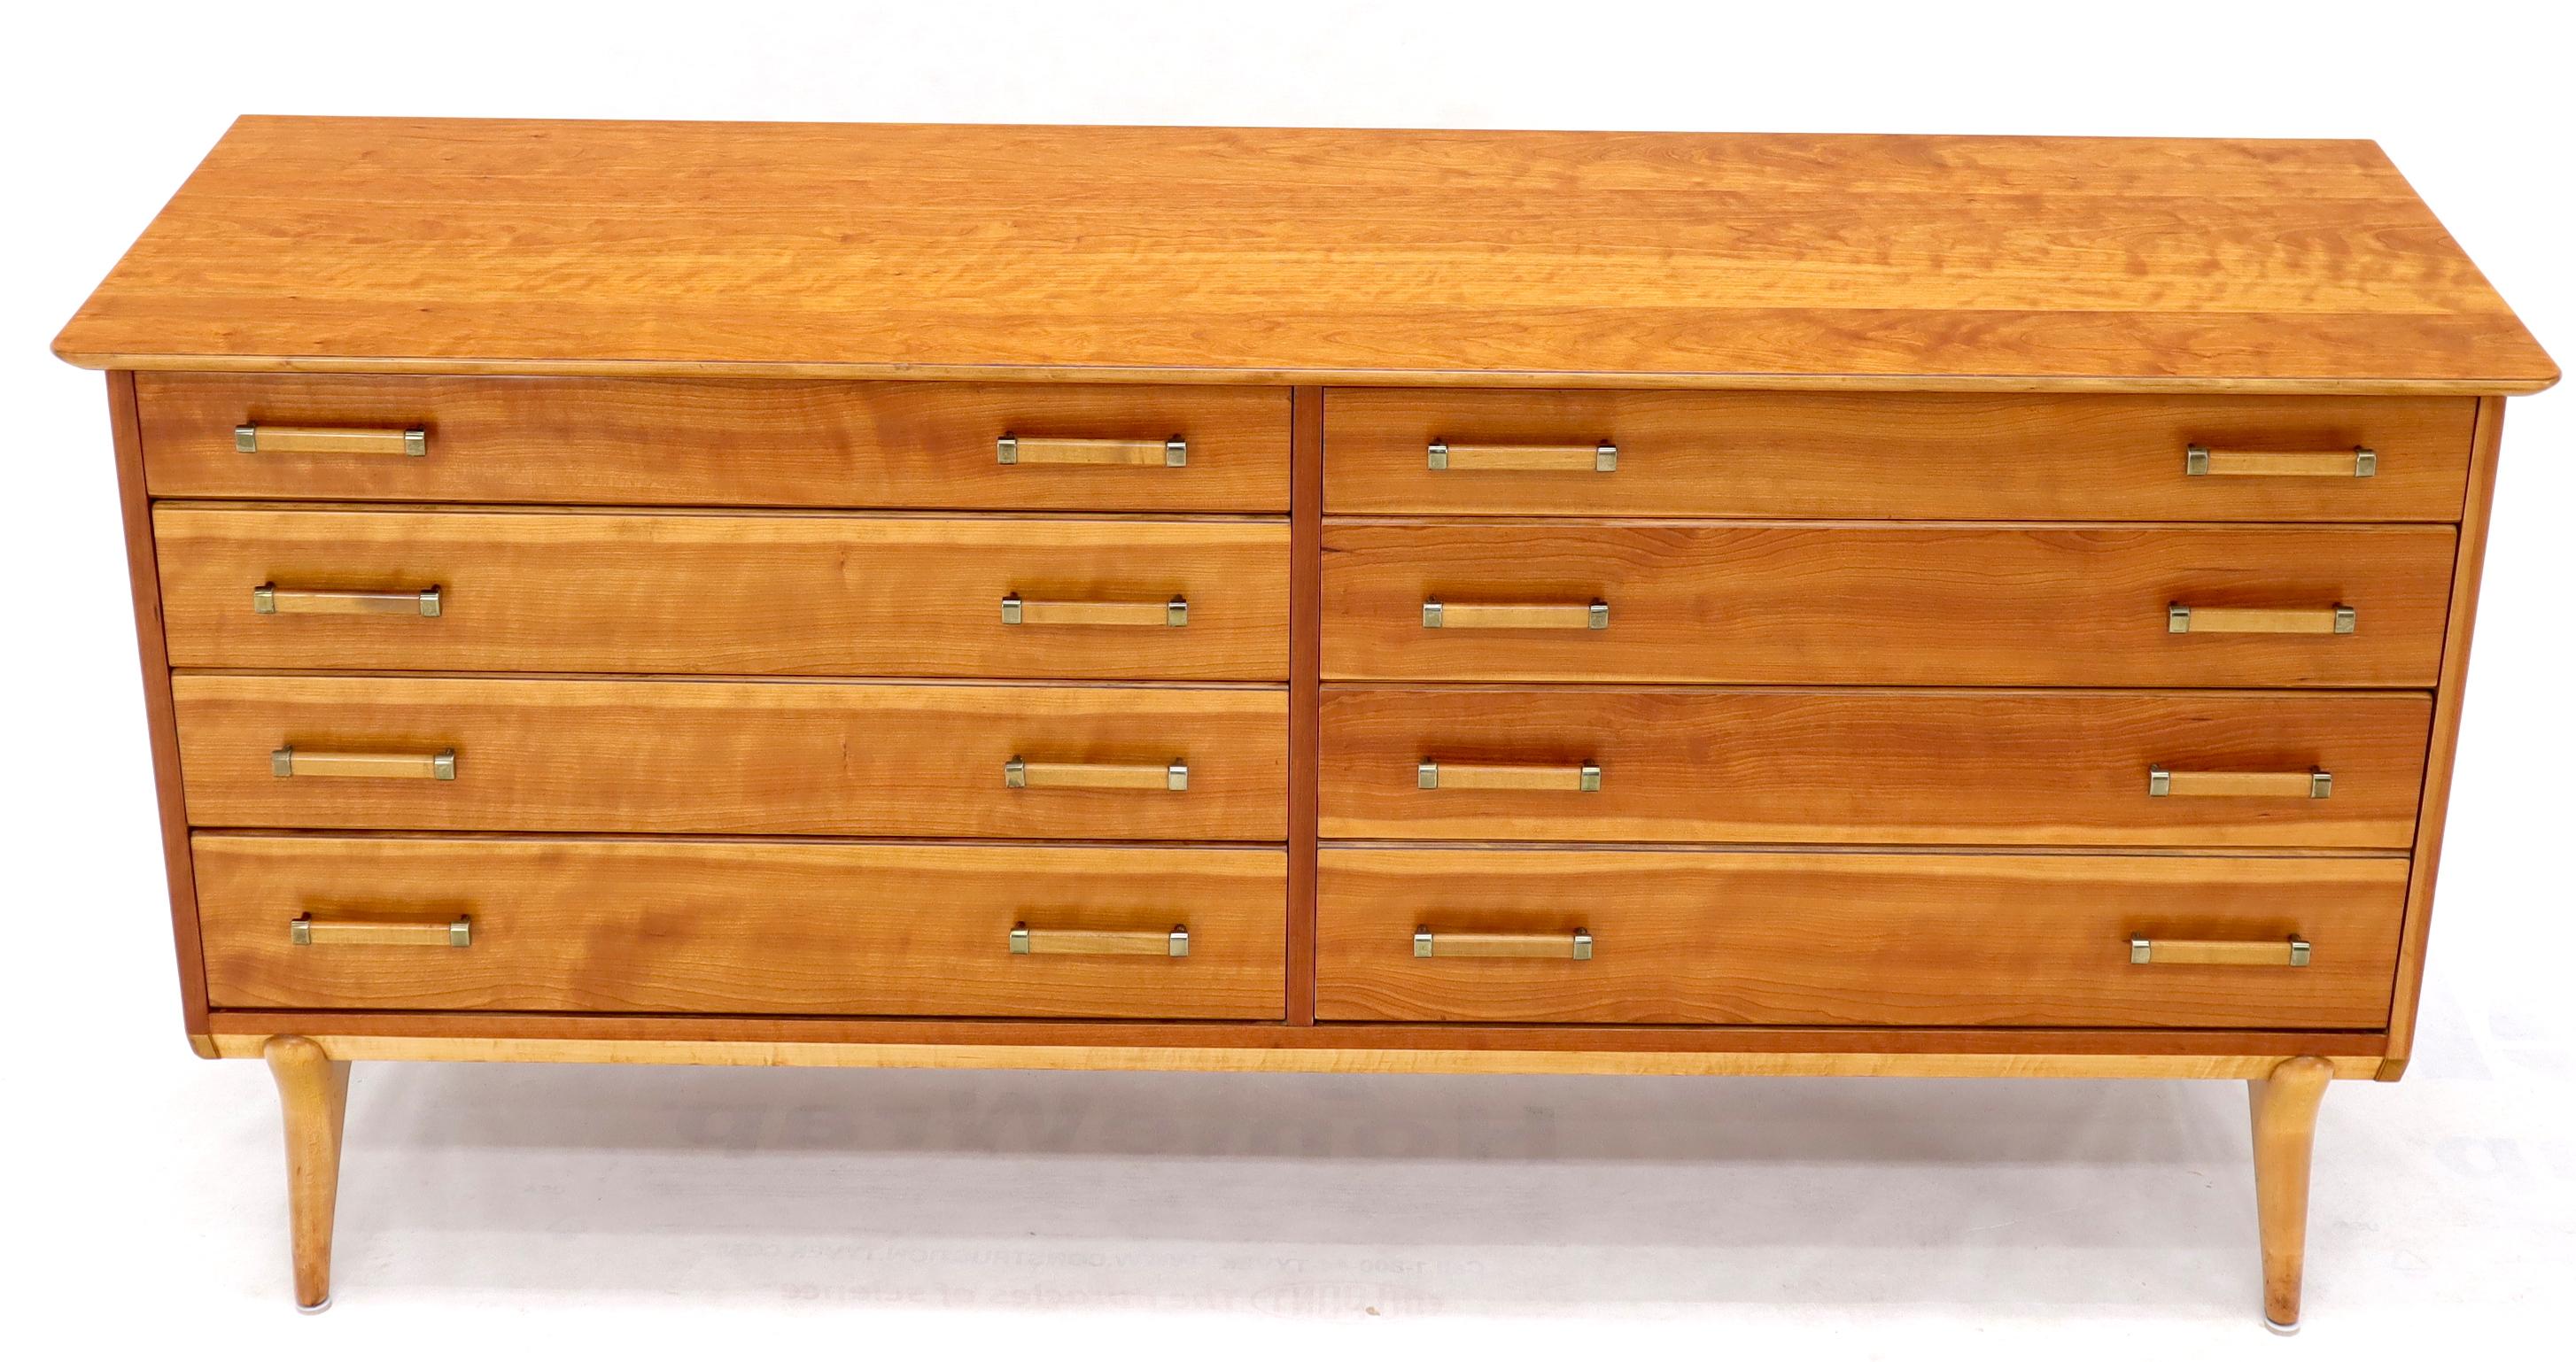 Mid-Century Modern 7 drawers solid cherry long dresser credenza by Renzo Rutily for Johnson Furniture. Near mint condition.